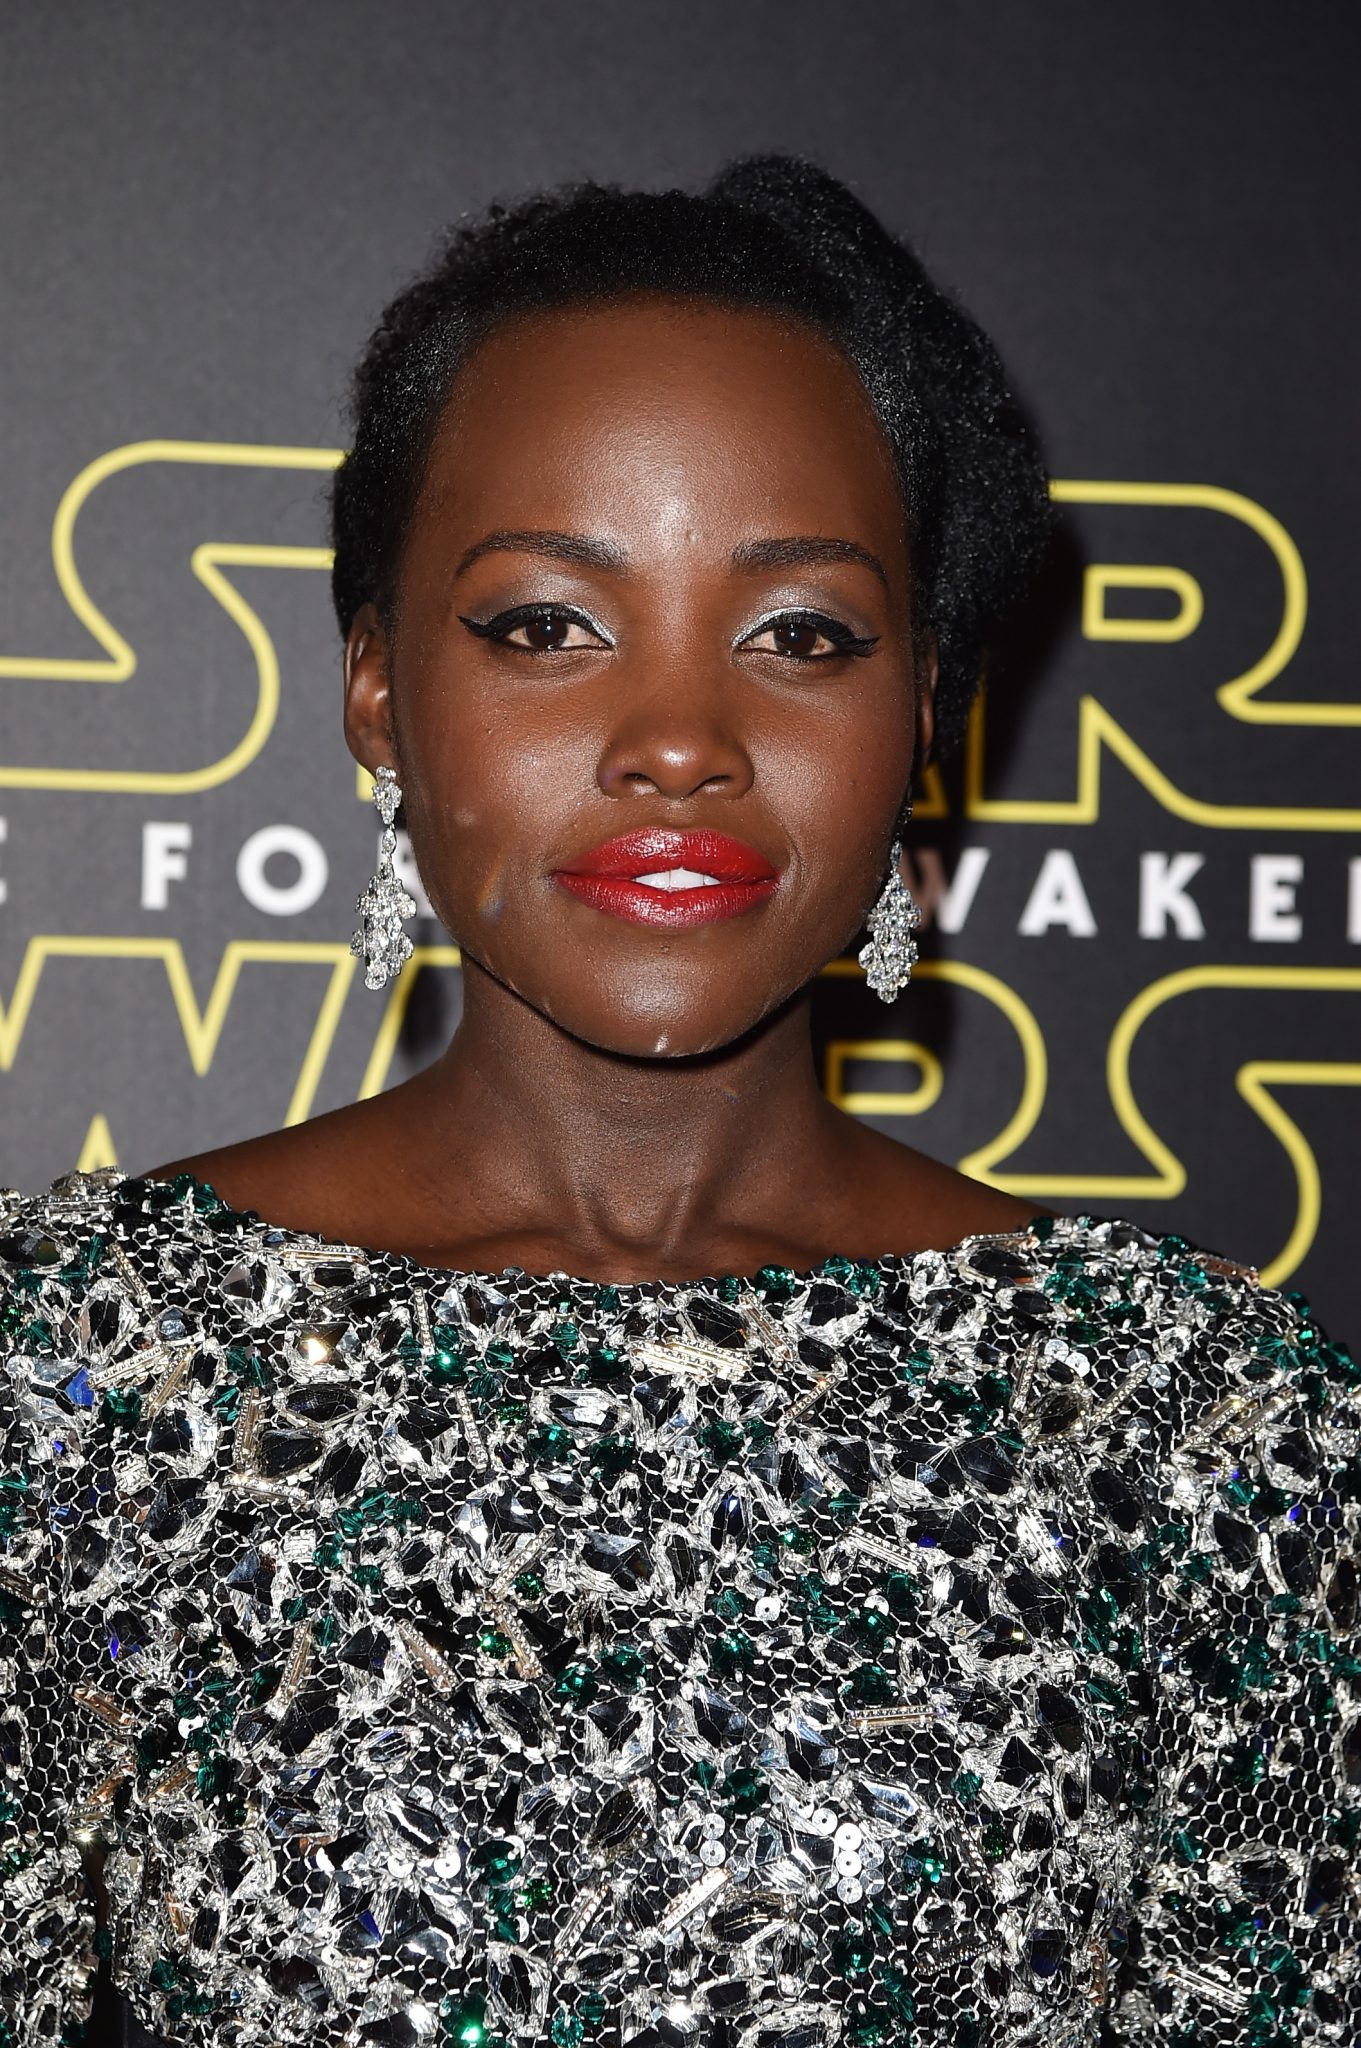 Get The Look: Lupita Nyong’o The Star Wars: Episode VII – The Force Awakens Los Angeles Premiere